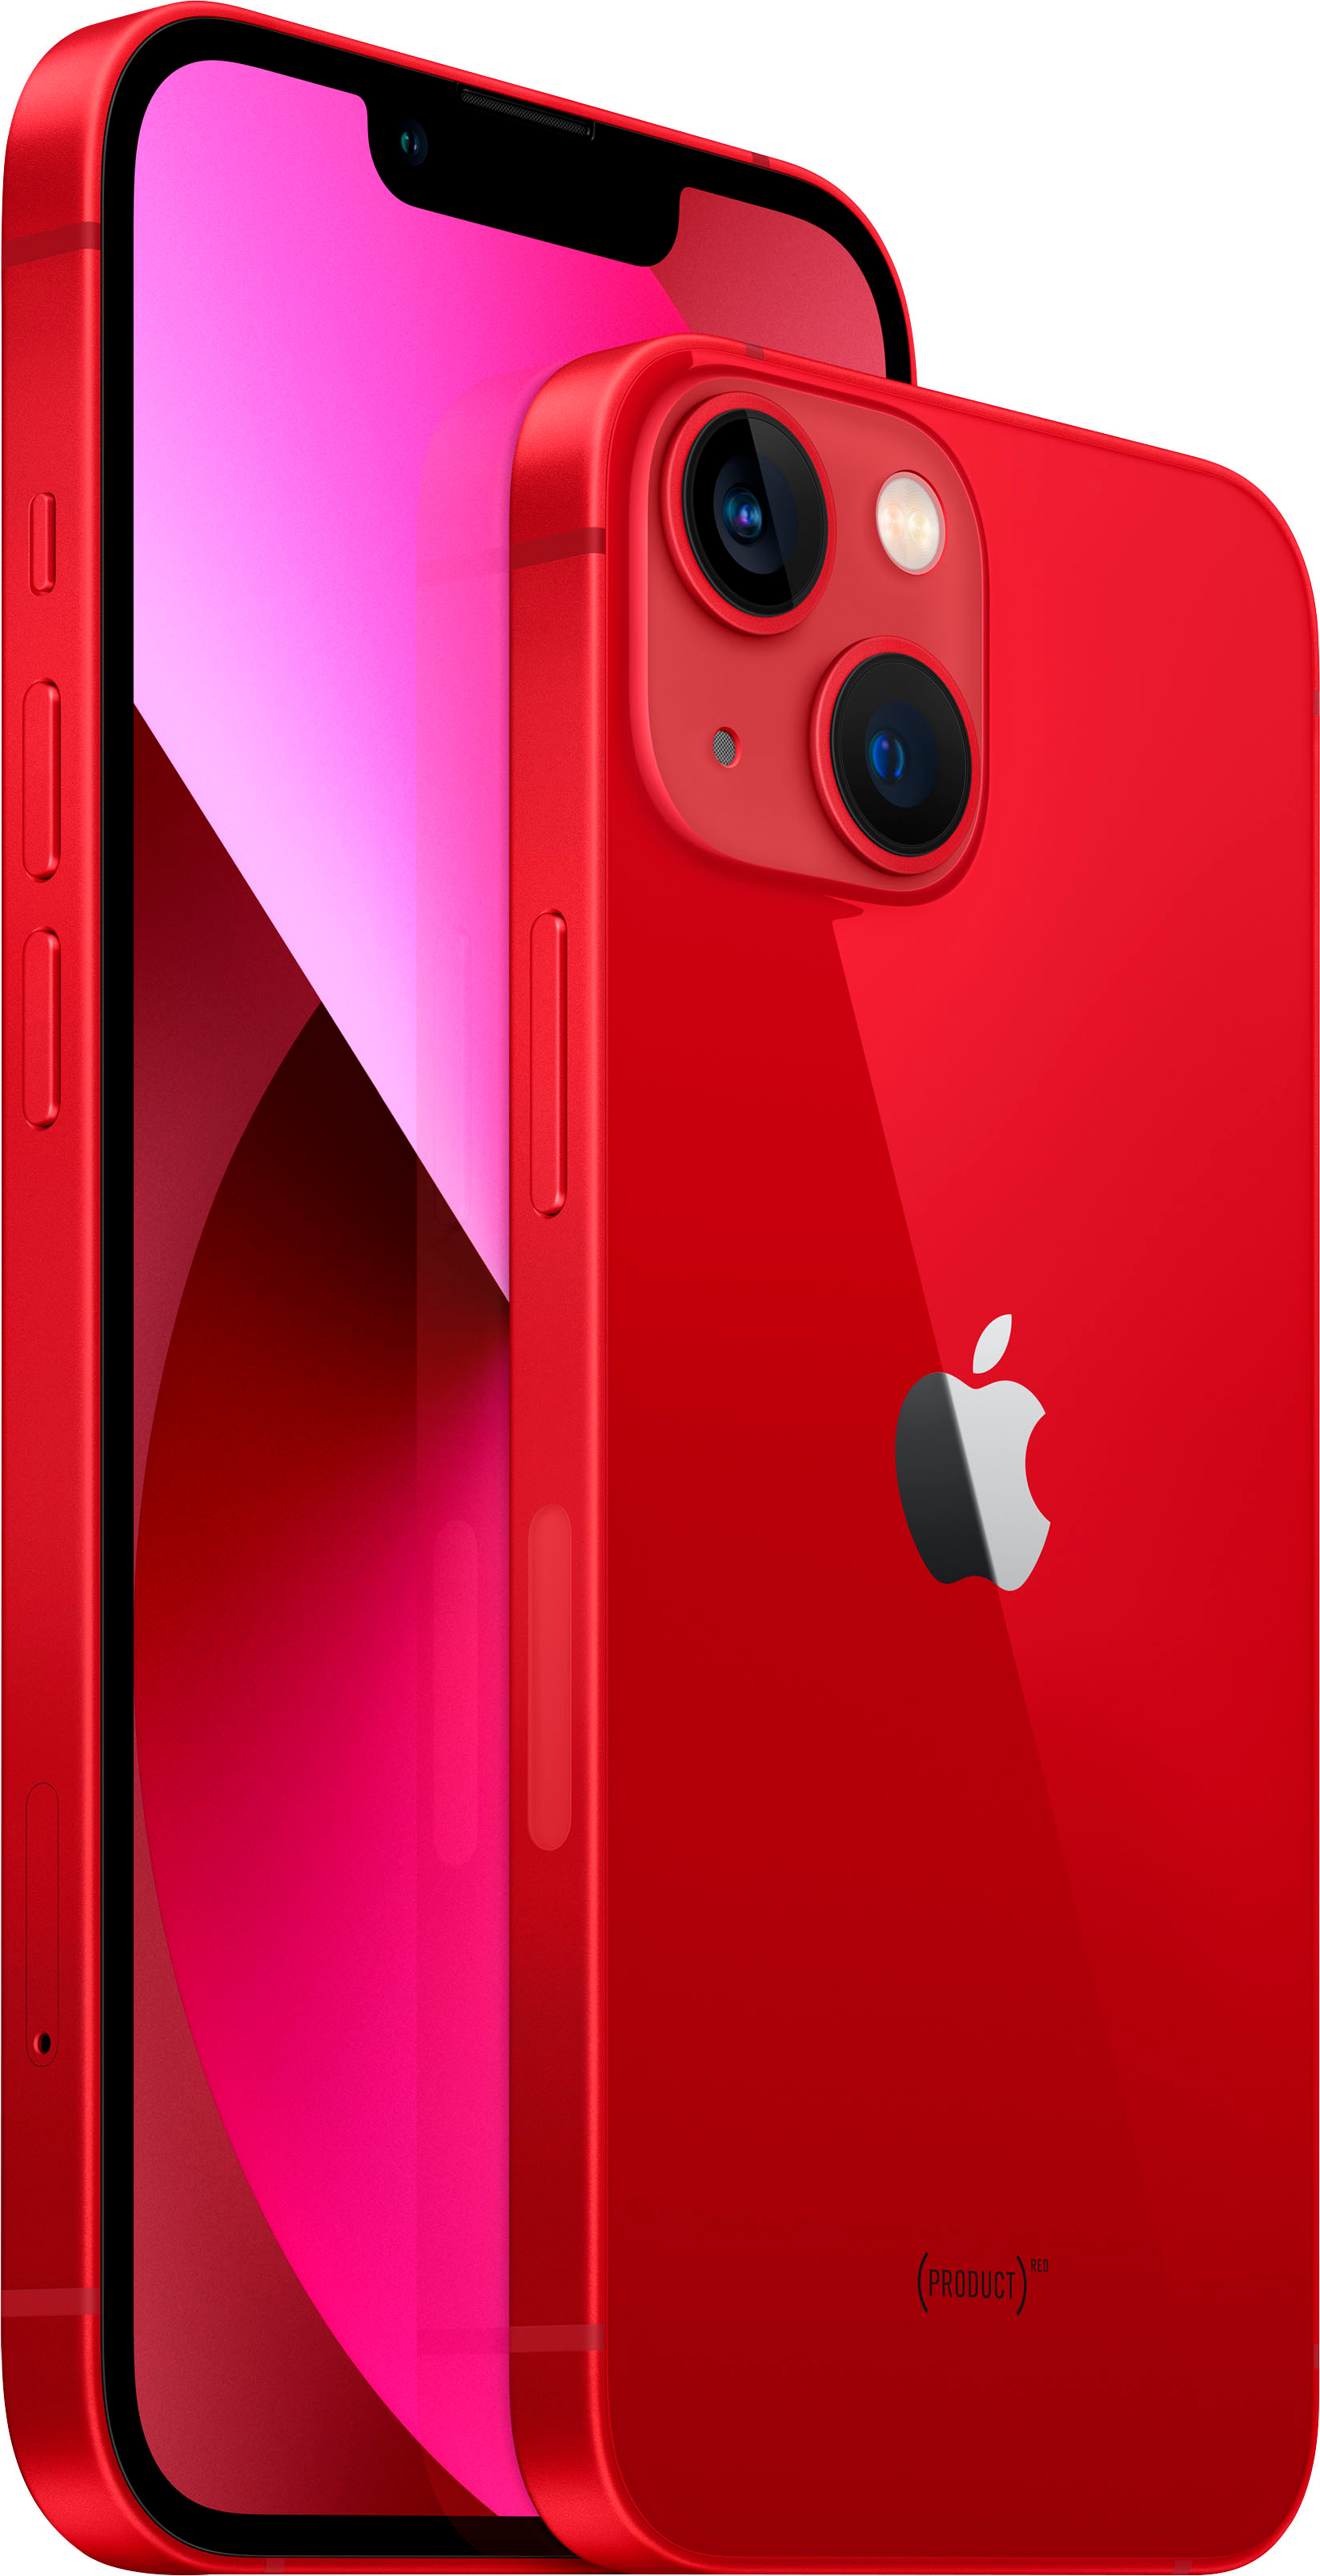 Apple iPhone 13 5G 128GB (Unlocked) (PRODUCT)RED MMM93LL/A - Best Buy